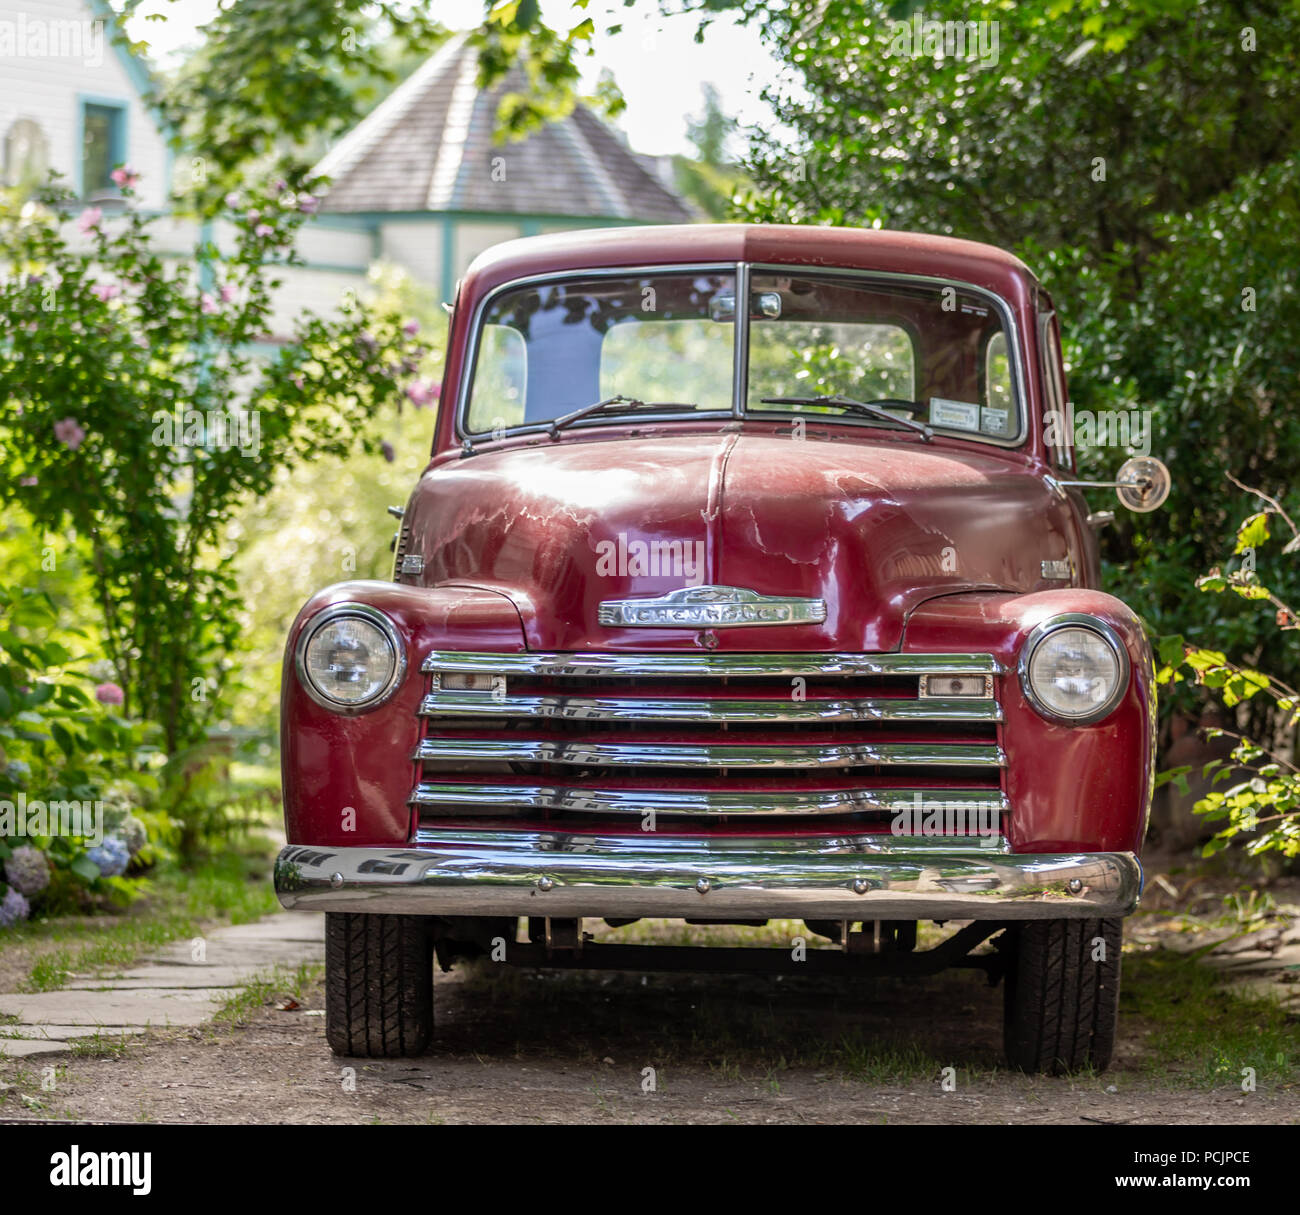 old red Chevrolet pick up truck Stock Photo